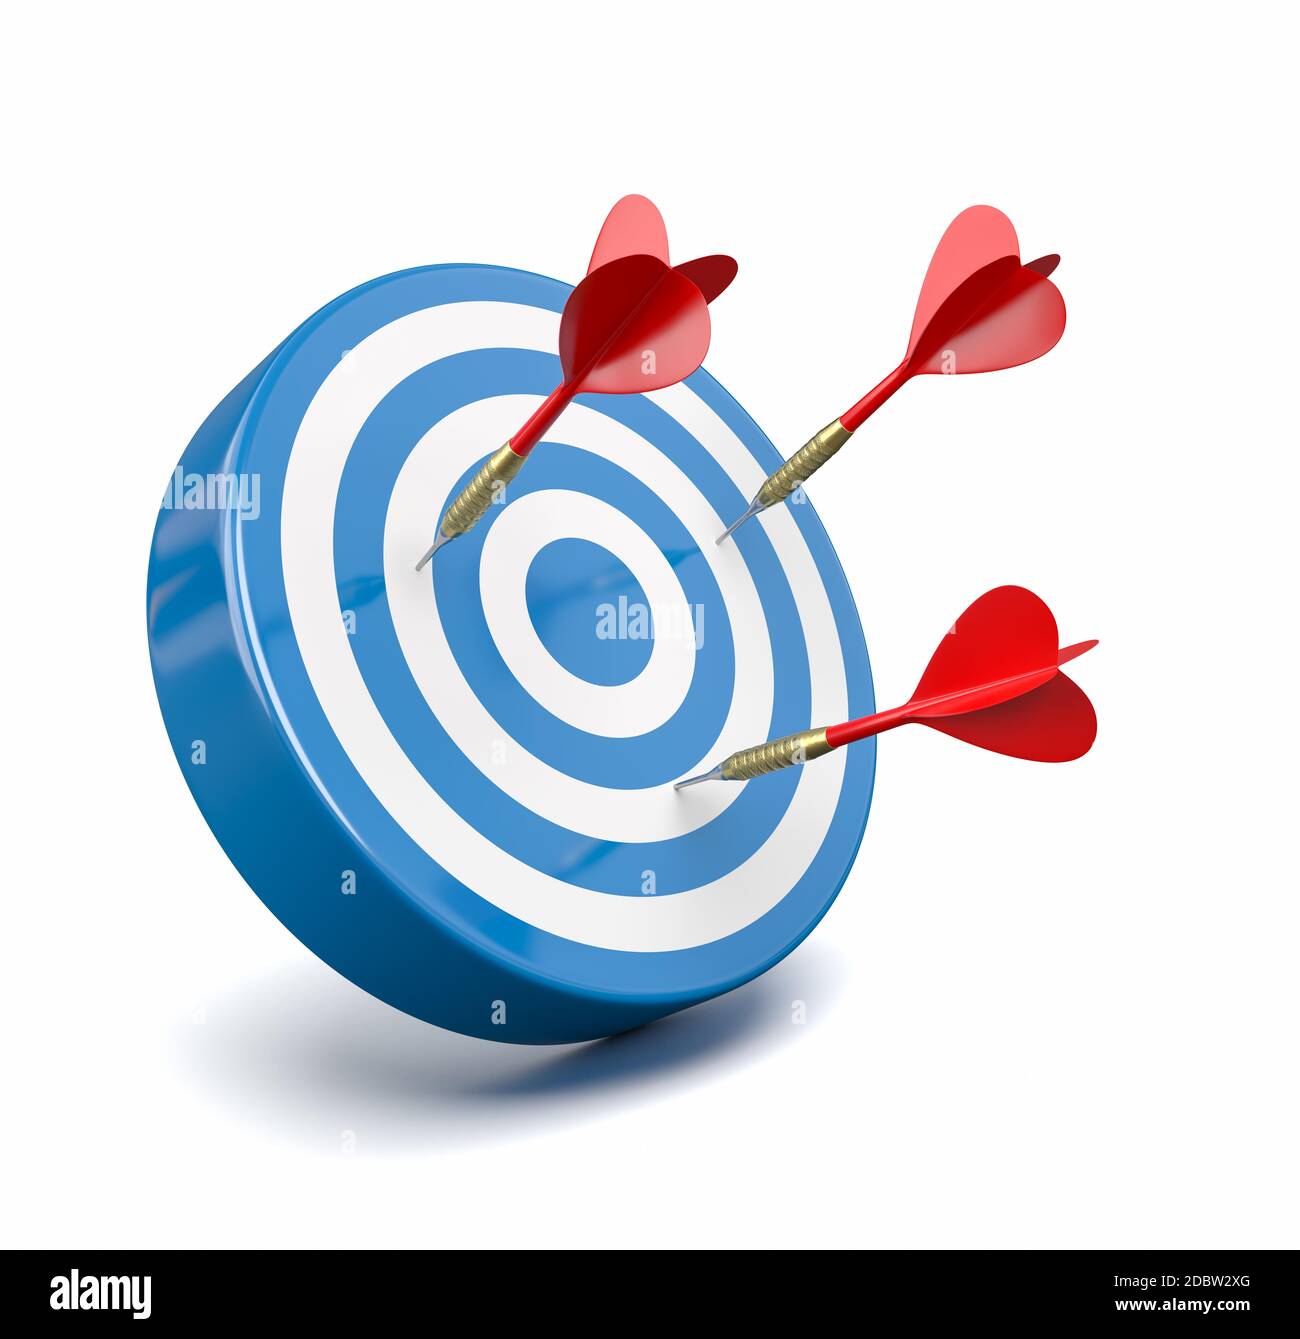 Three Red Darts Hitting a Blue Target on White Background 3D Illustration, Failure Concept Stock Photo